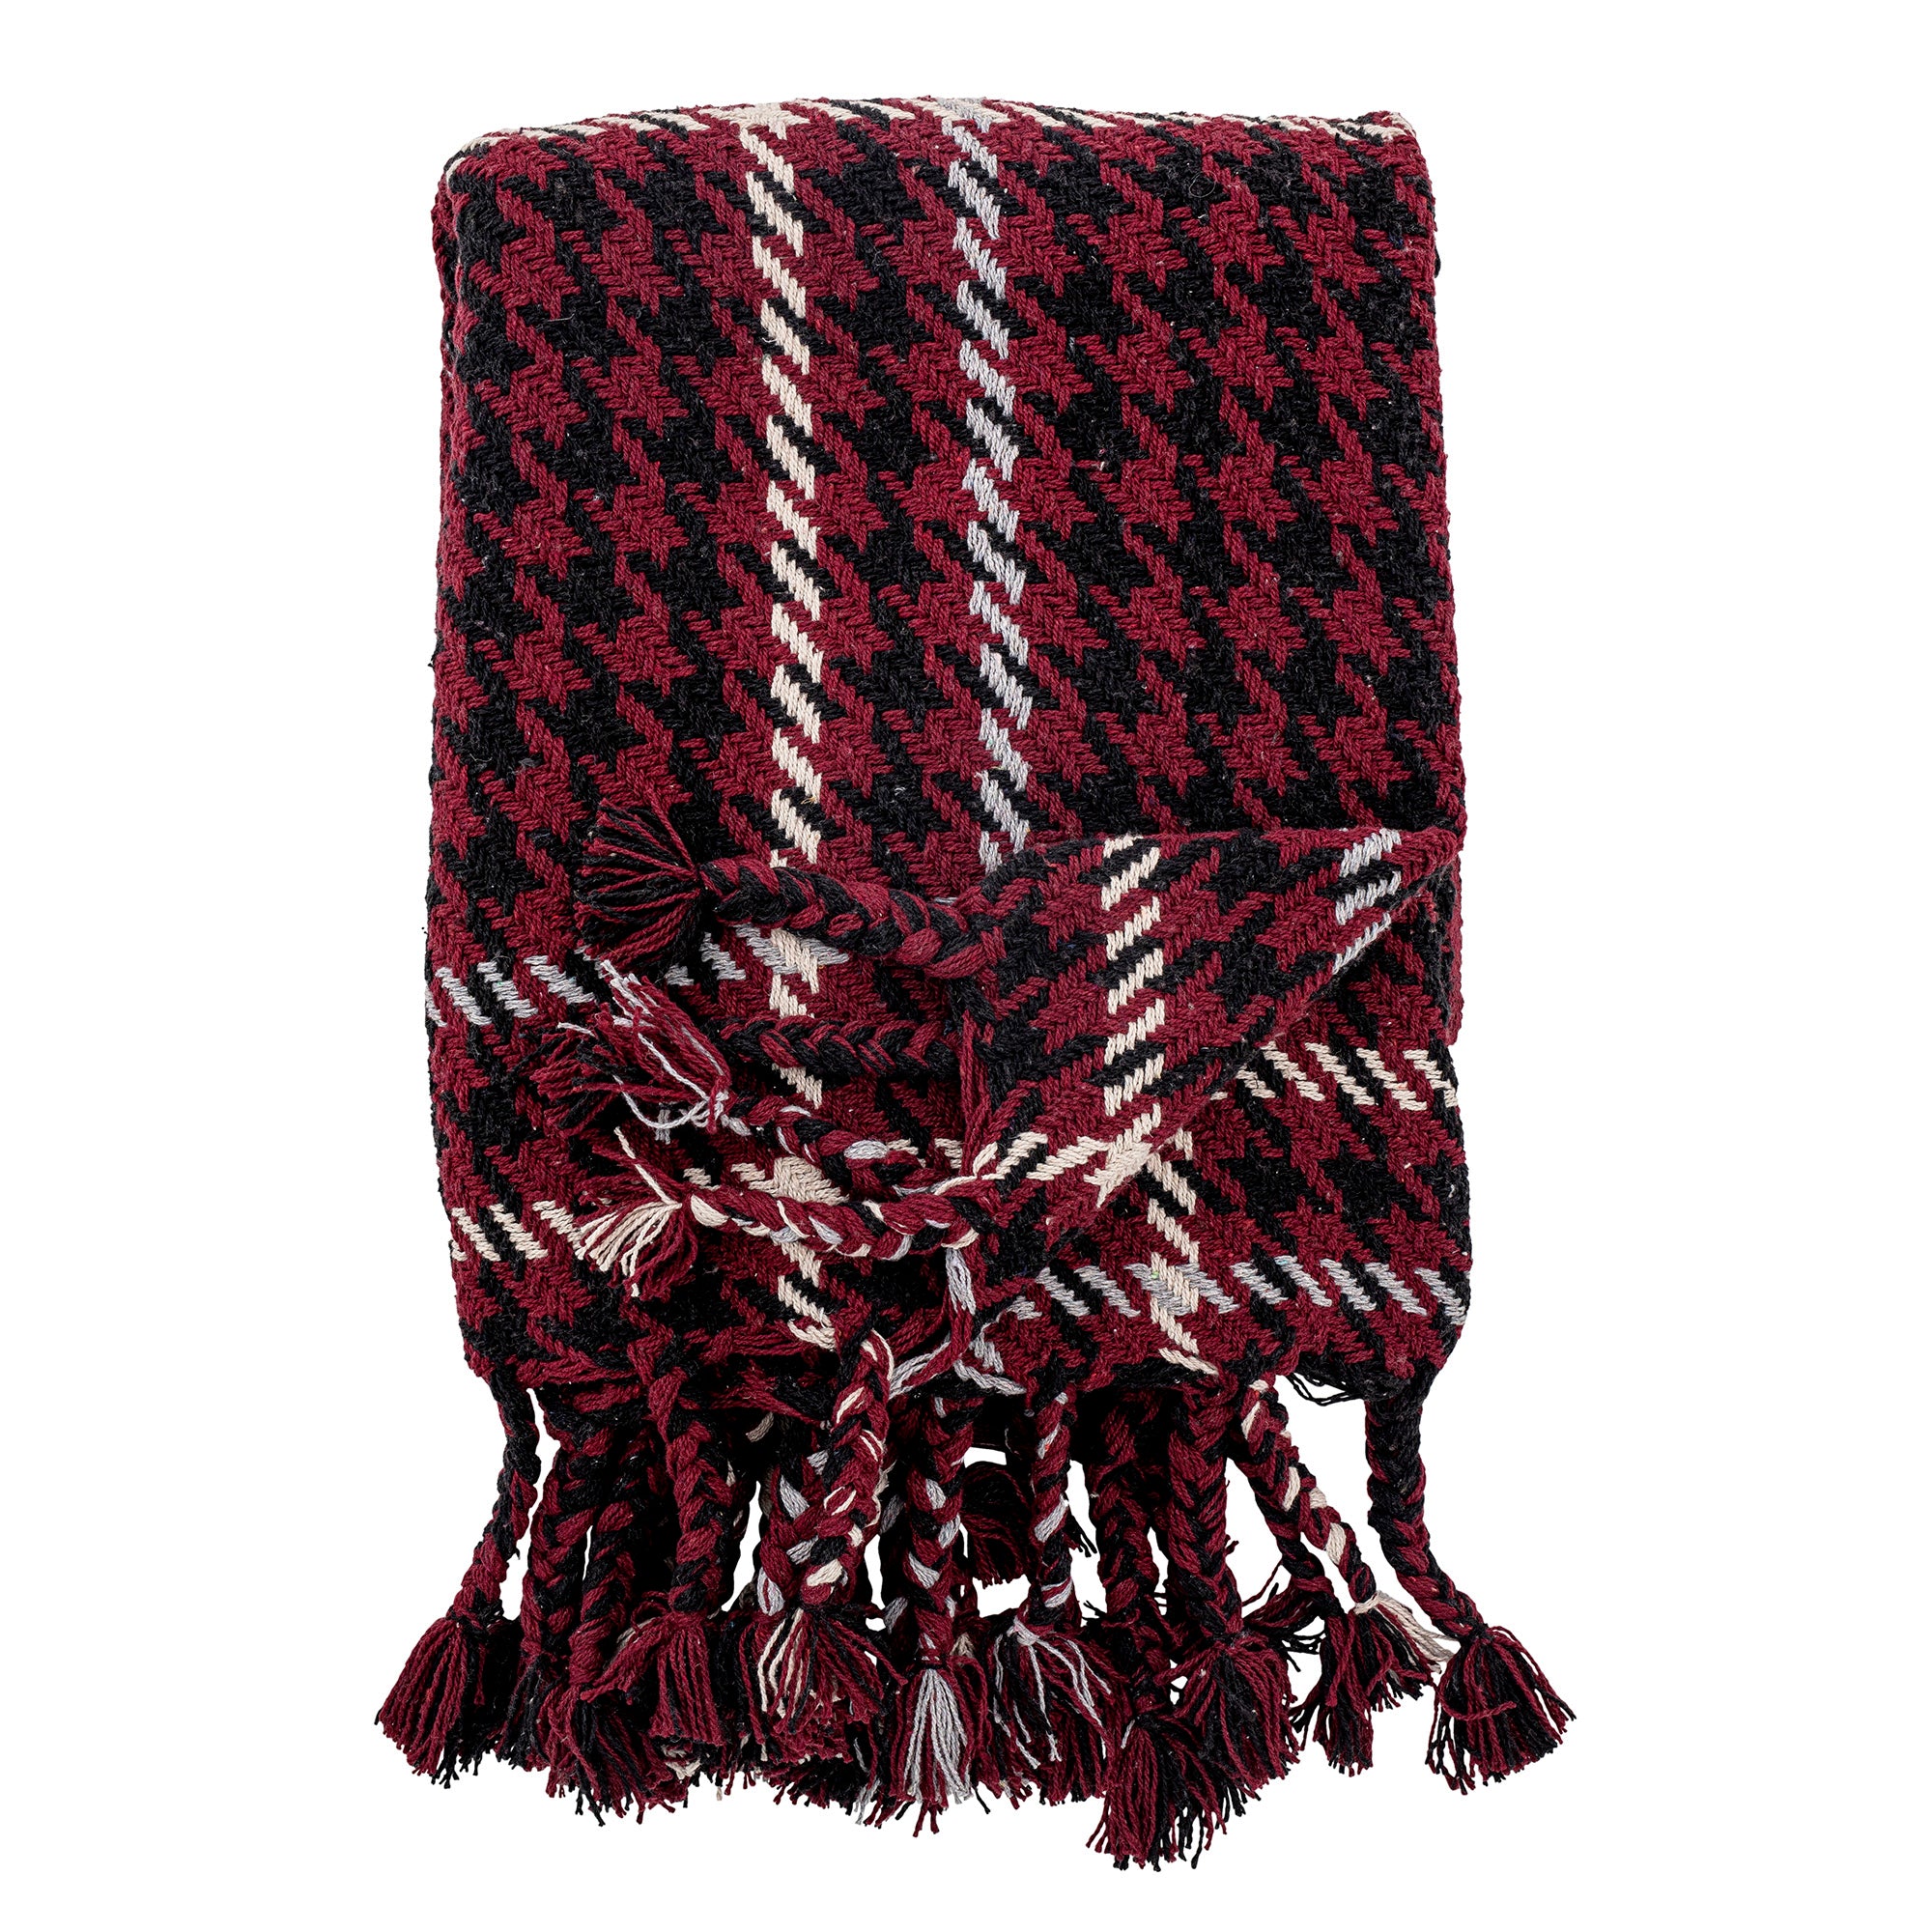 Red, Black & White Houndstooth Recycled Cotton Throw